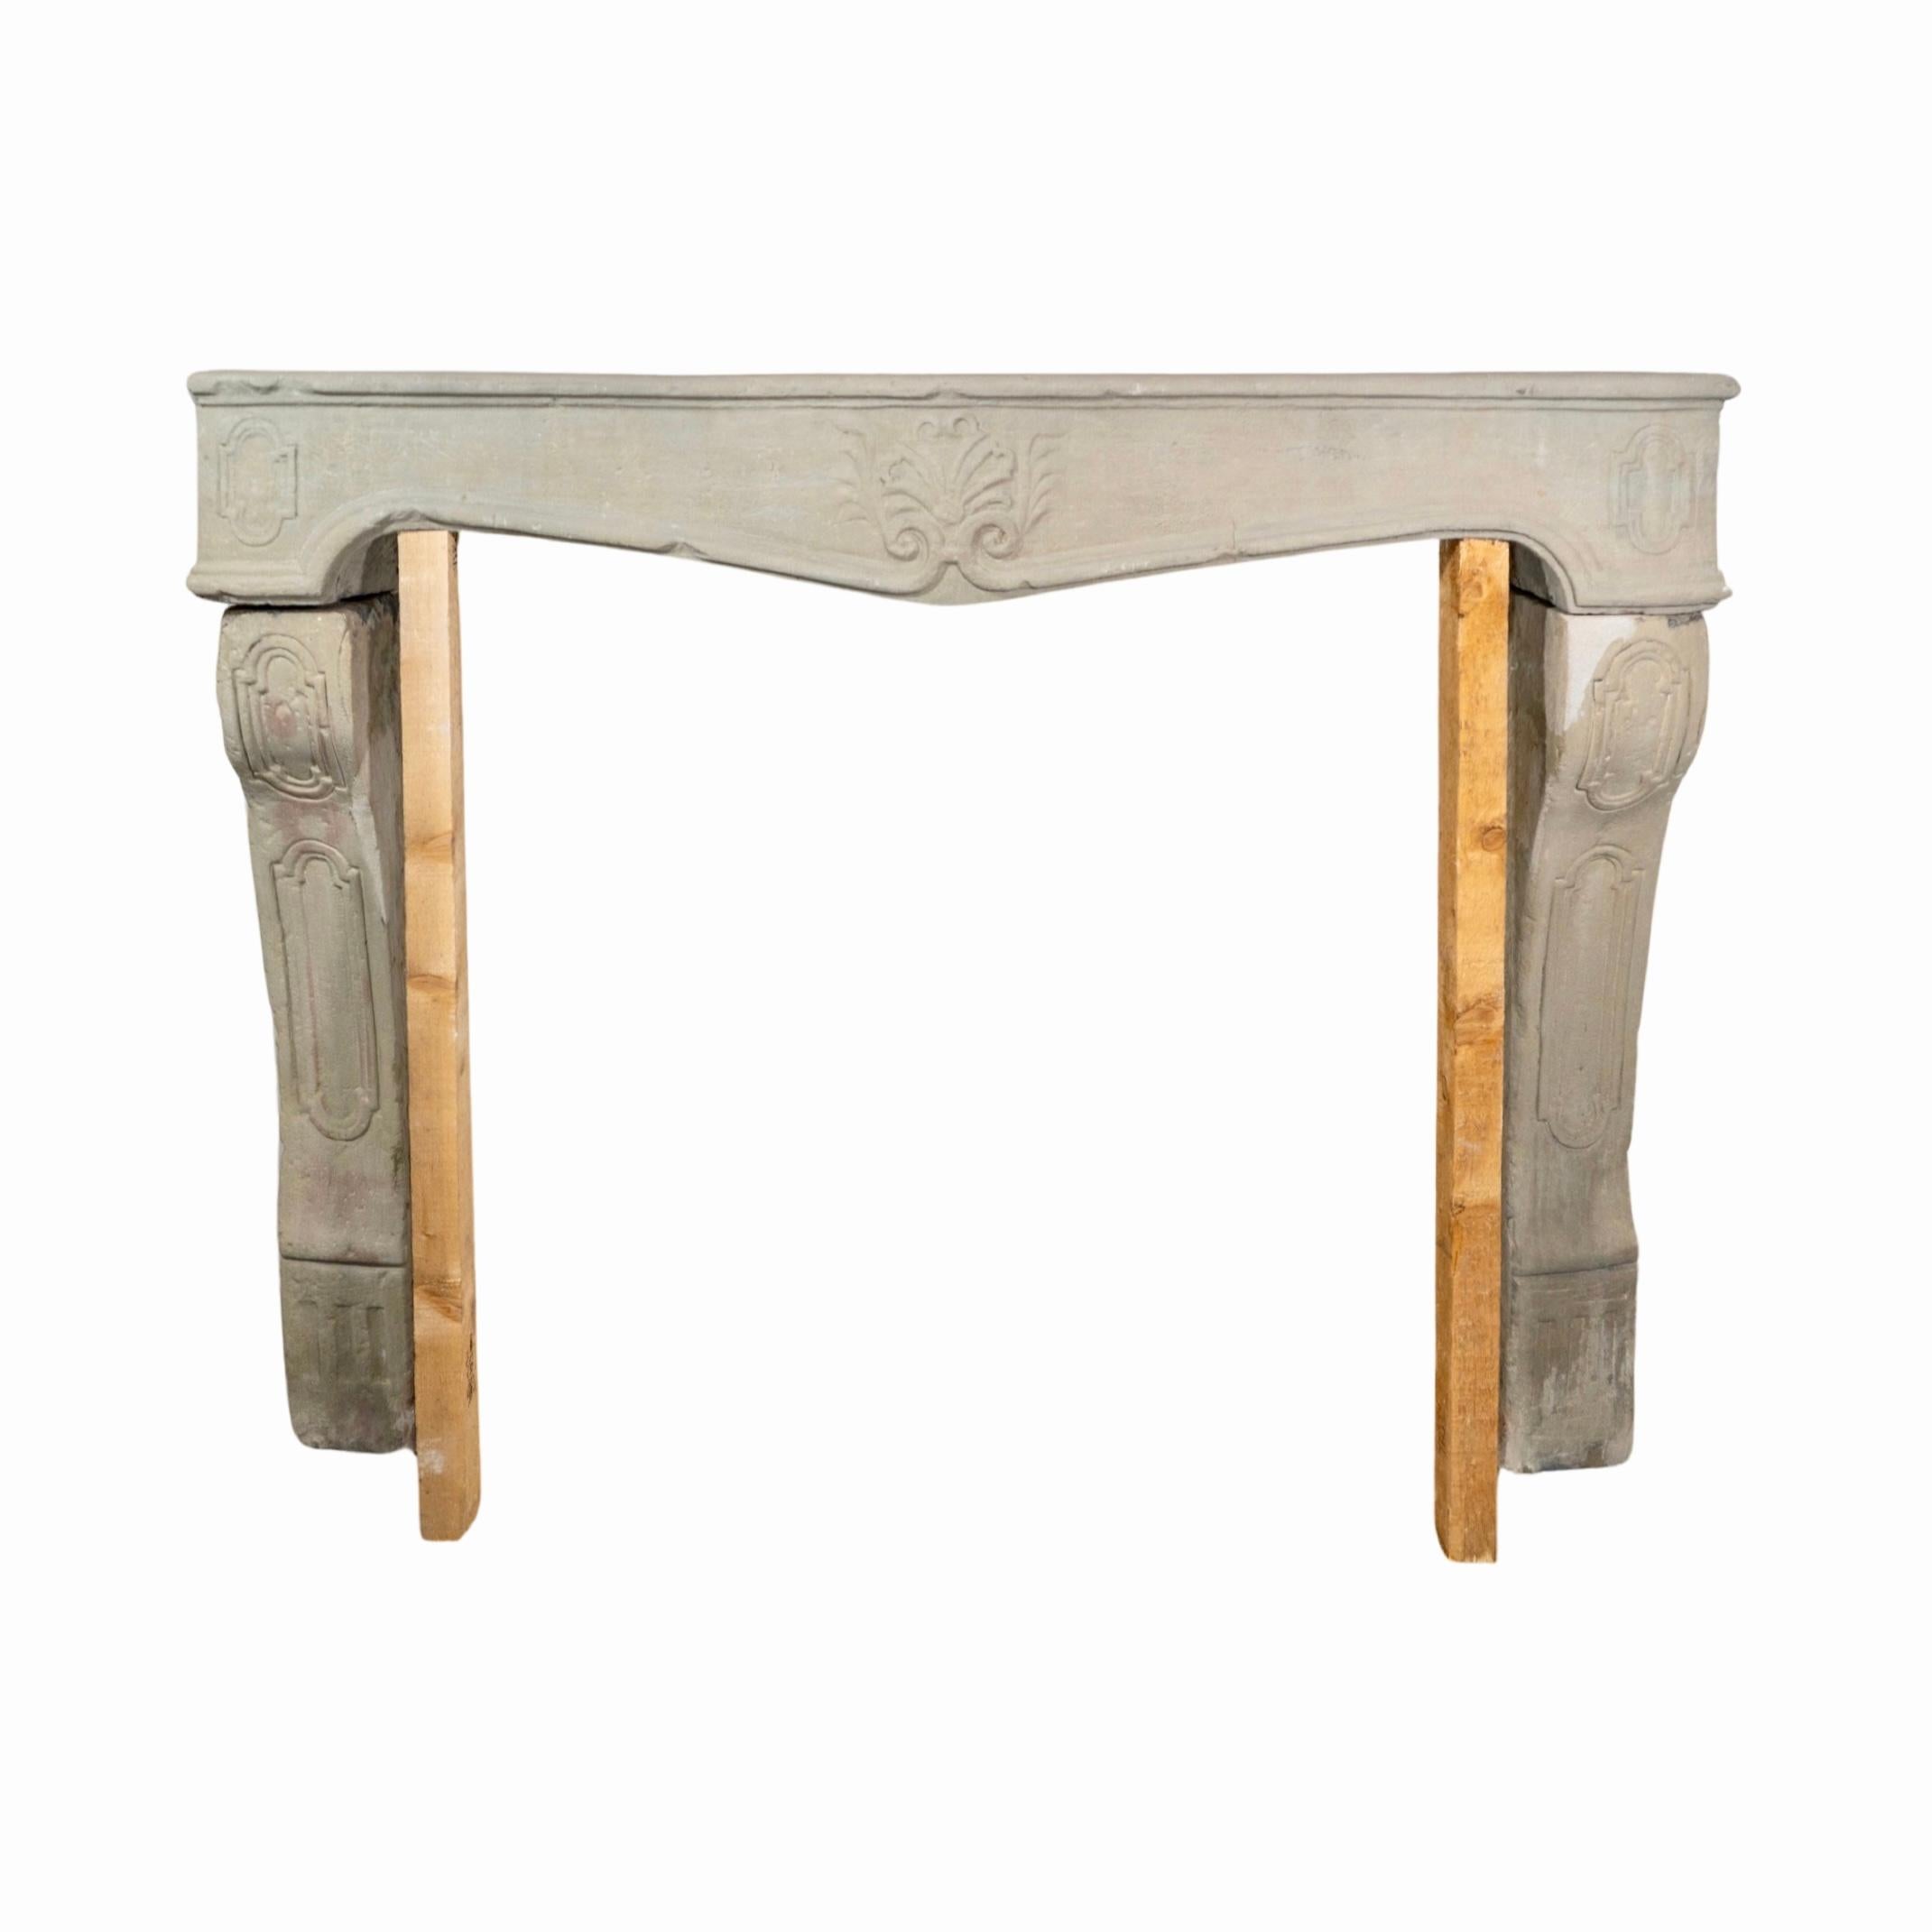 A beautiful French limestone mantel from the 1720s. Crafted in the iconic Louis XVI style with ornate carvings, it's sure to make a statement in any space. Experience the strength and durability of limestone construction for a timeless piece to